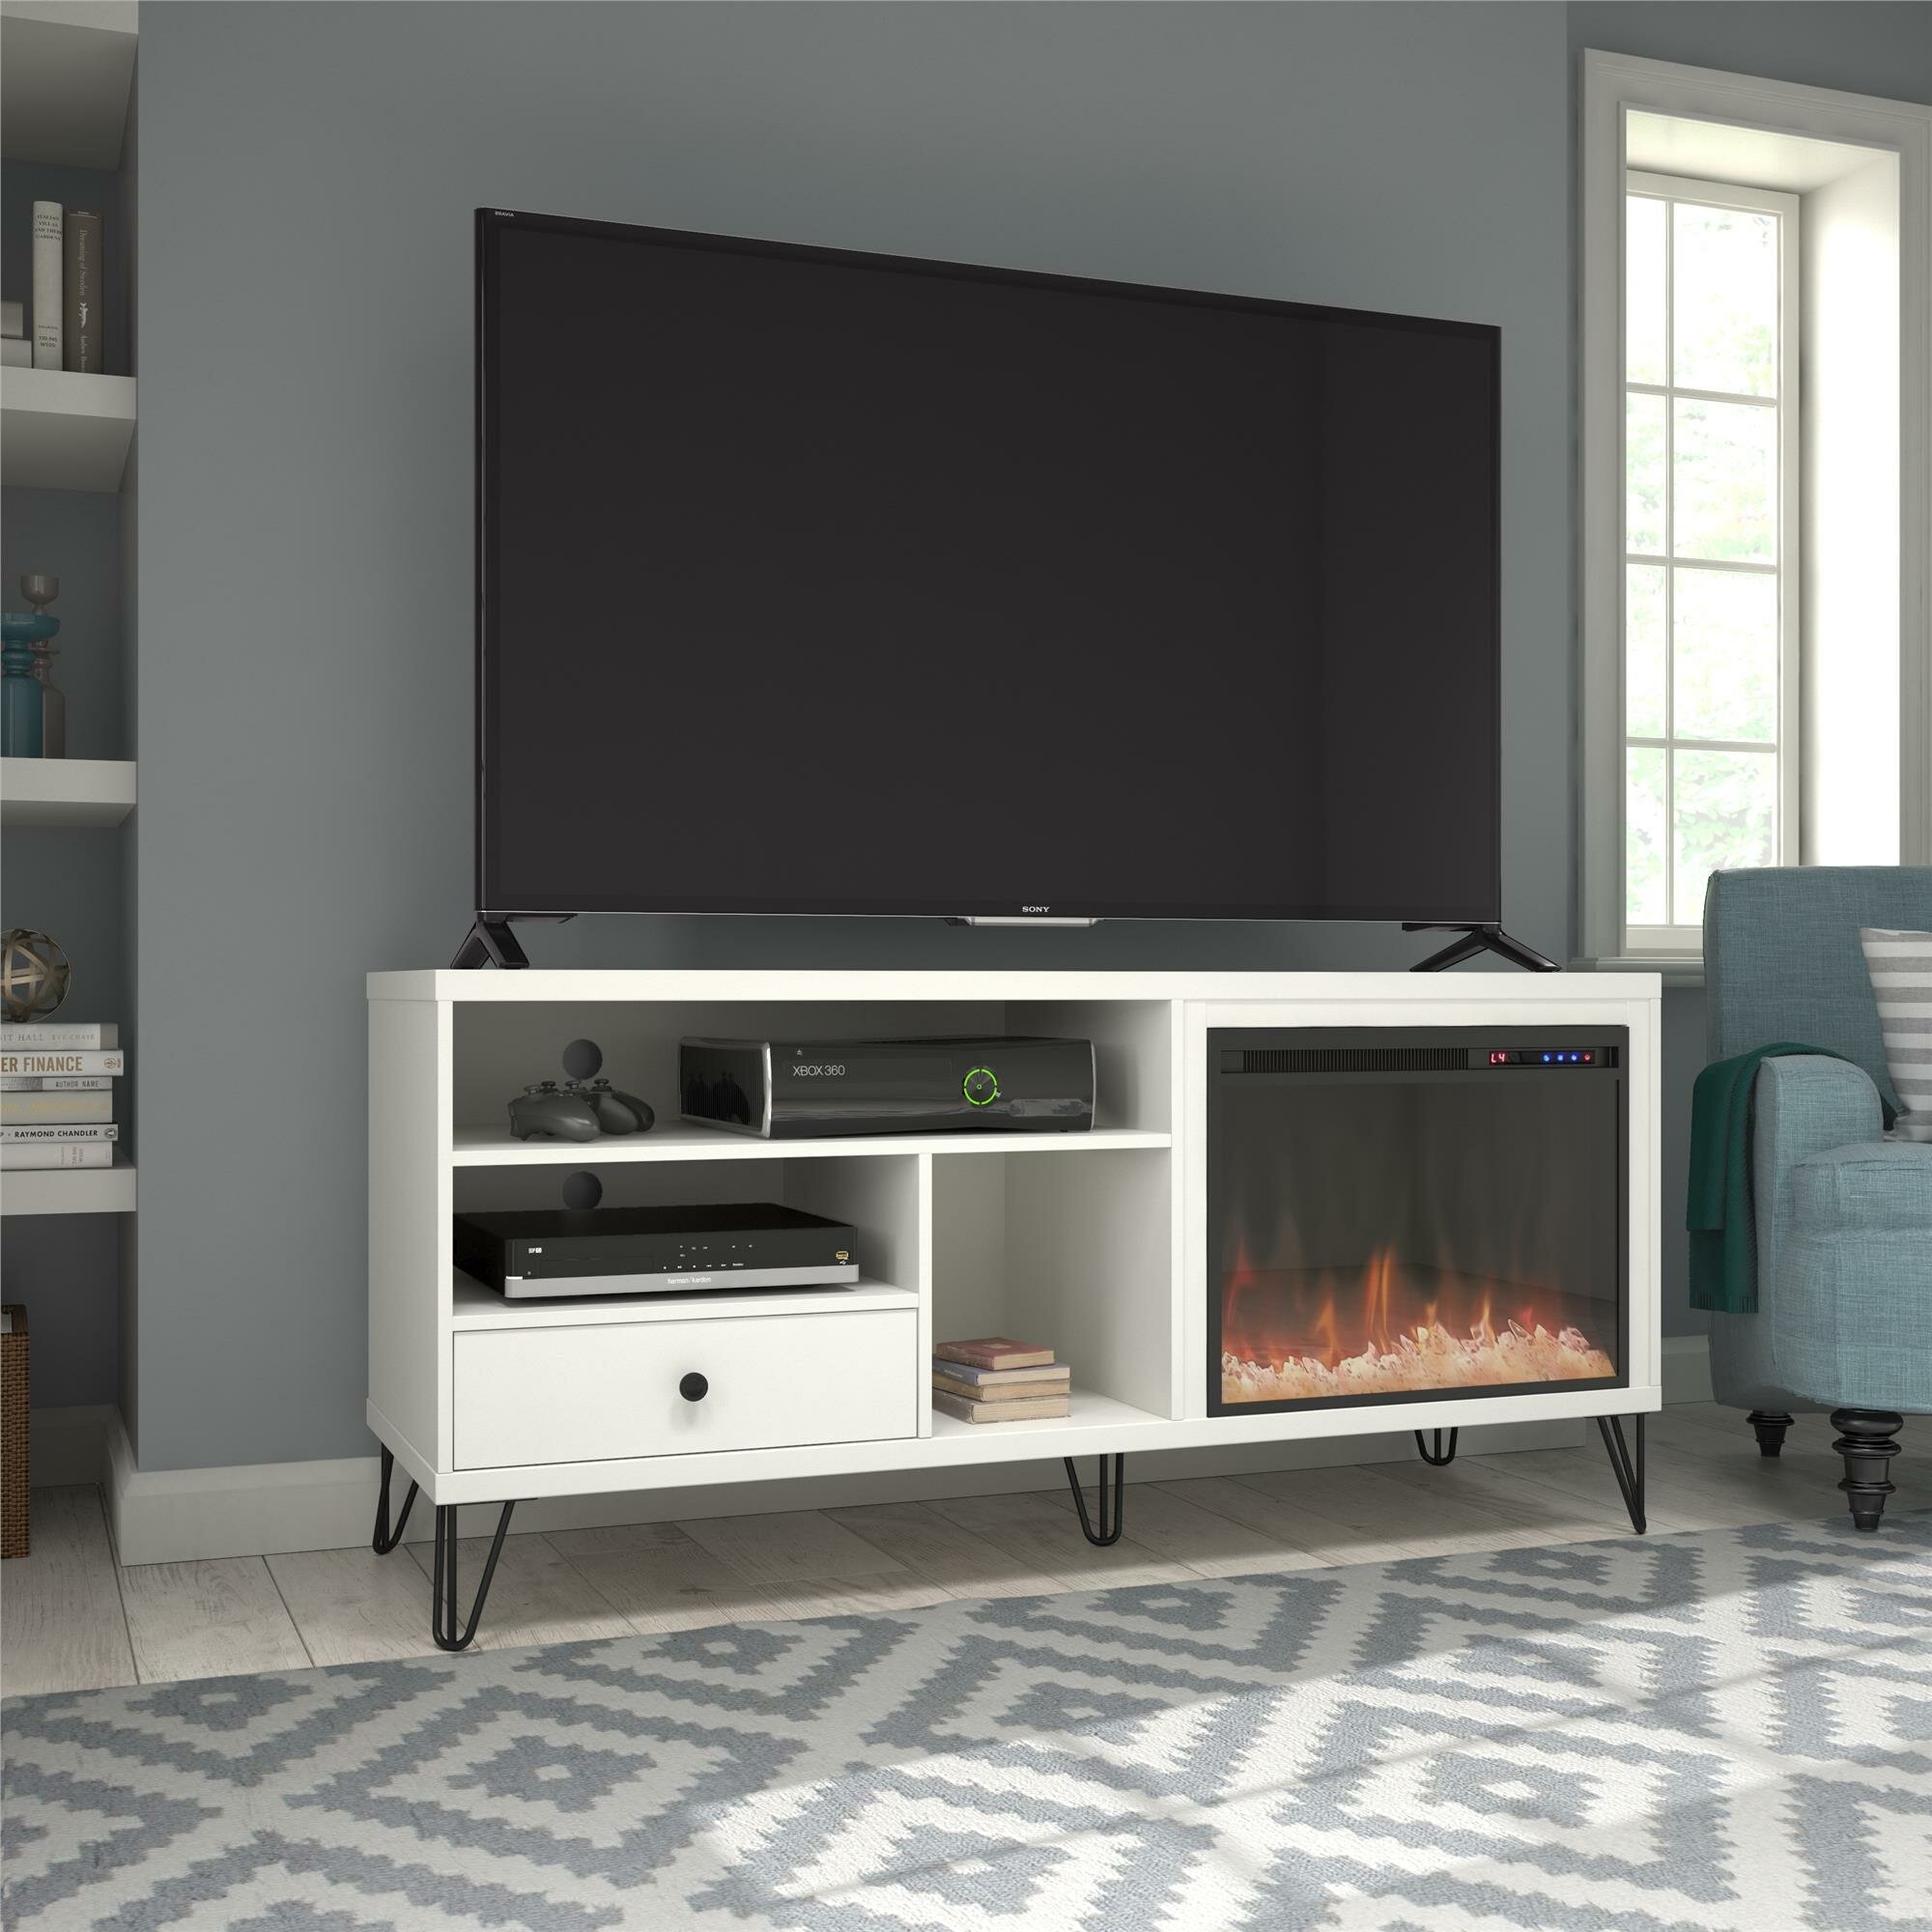 Forest Park TV Stand for TVs up to 65" with Electric Fireplace Included